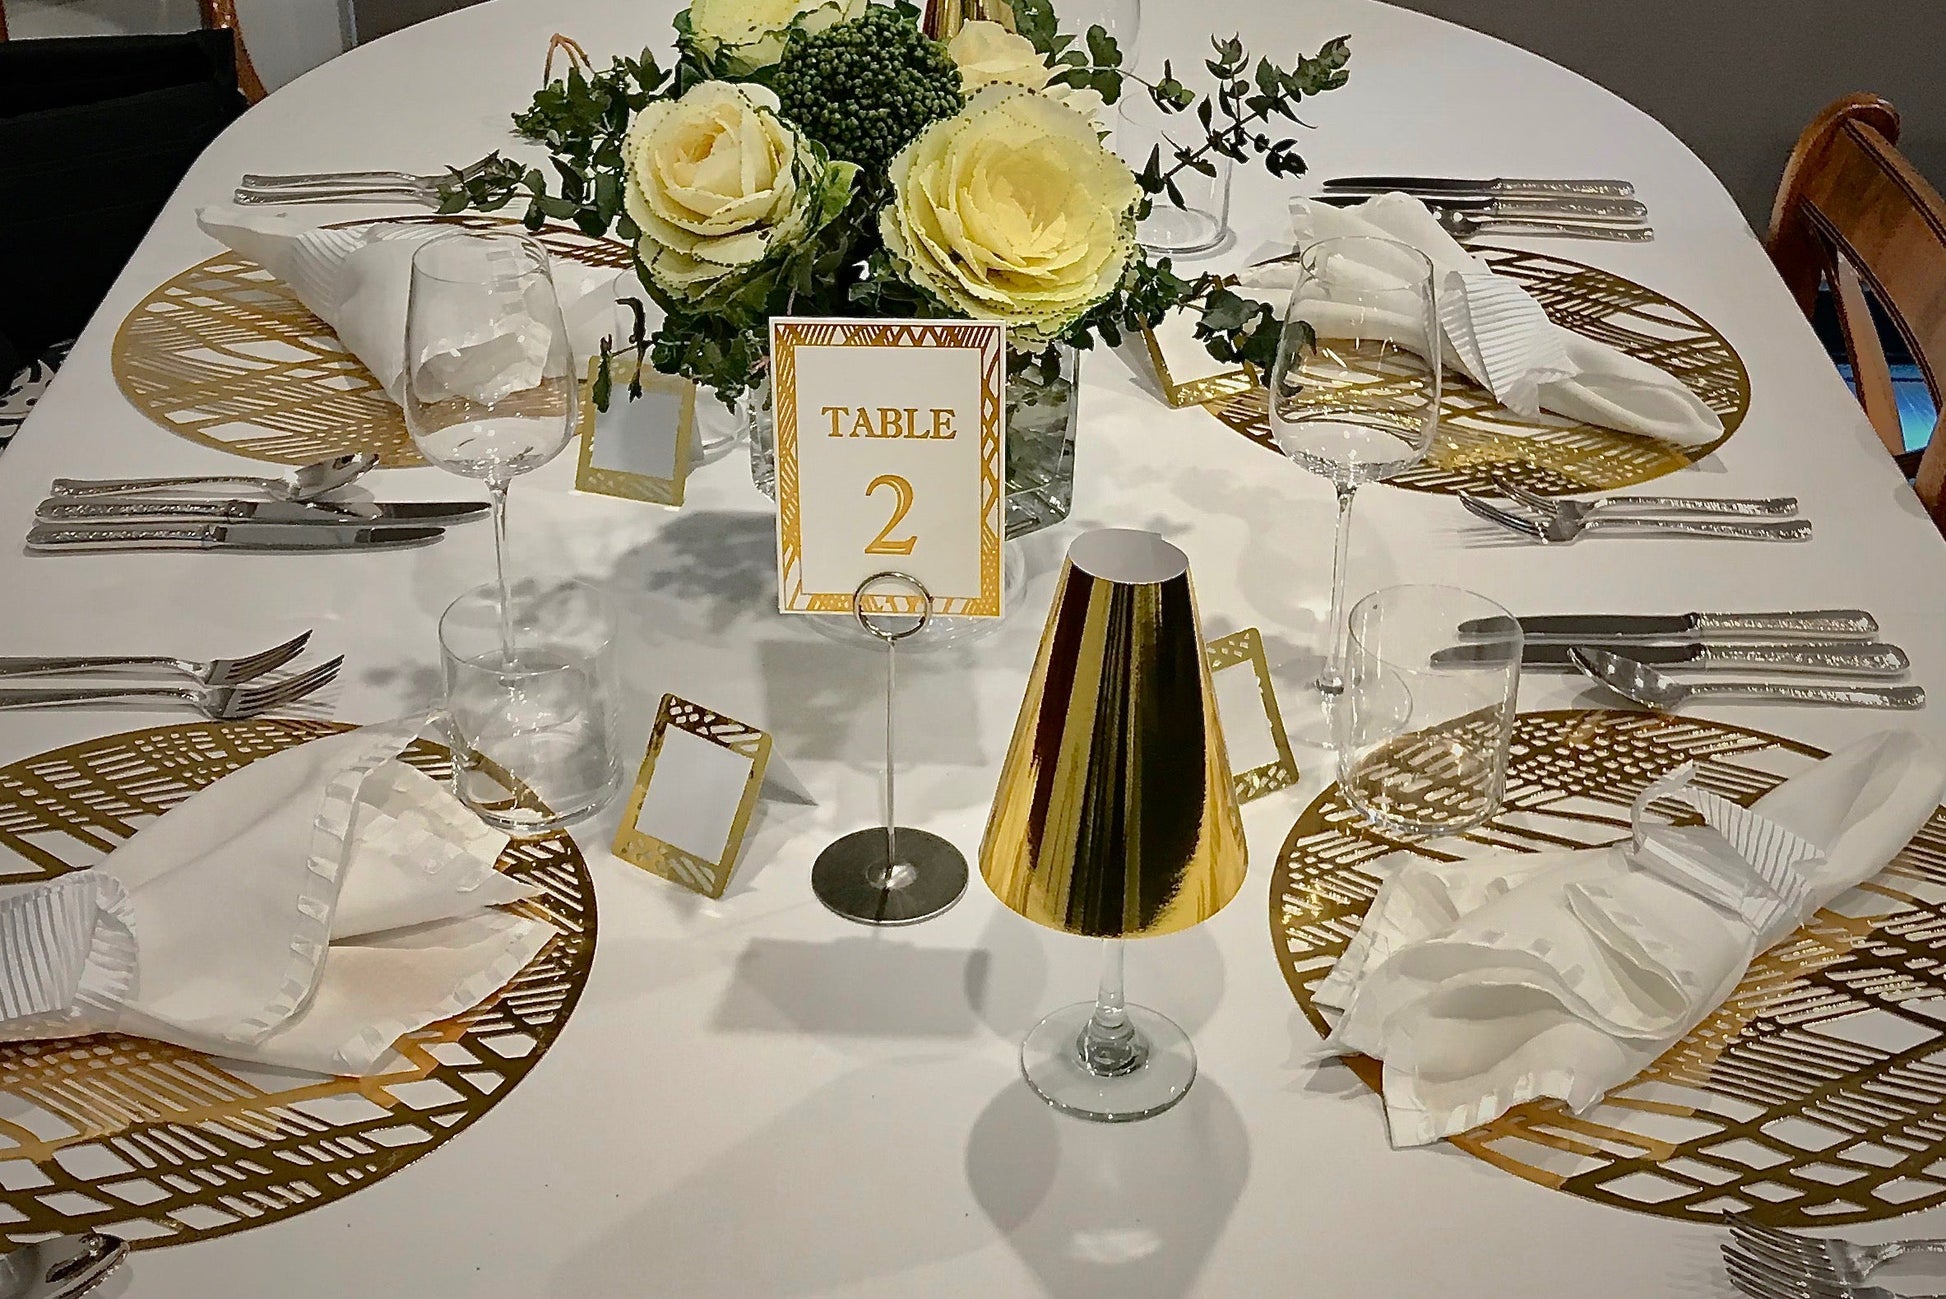 Gold Table Numbers (Pack of 12) (Weave) - Place Matters